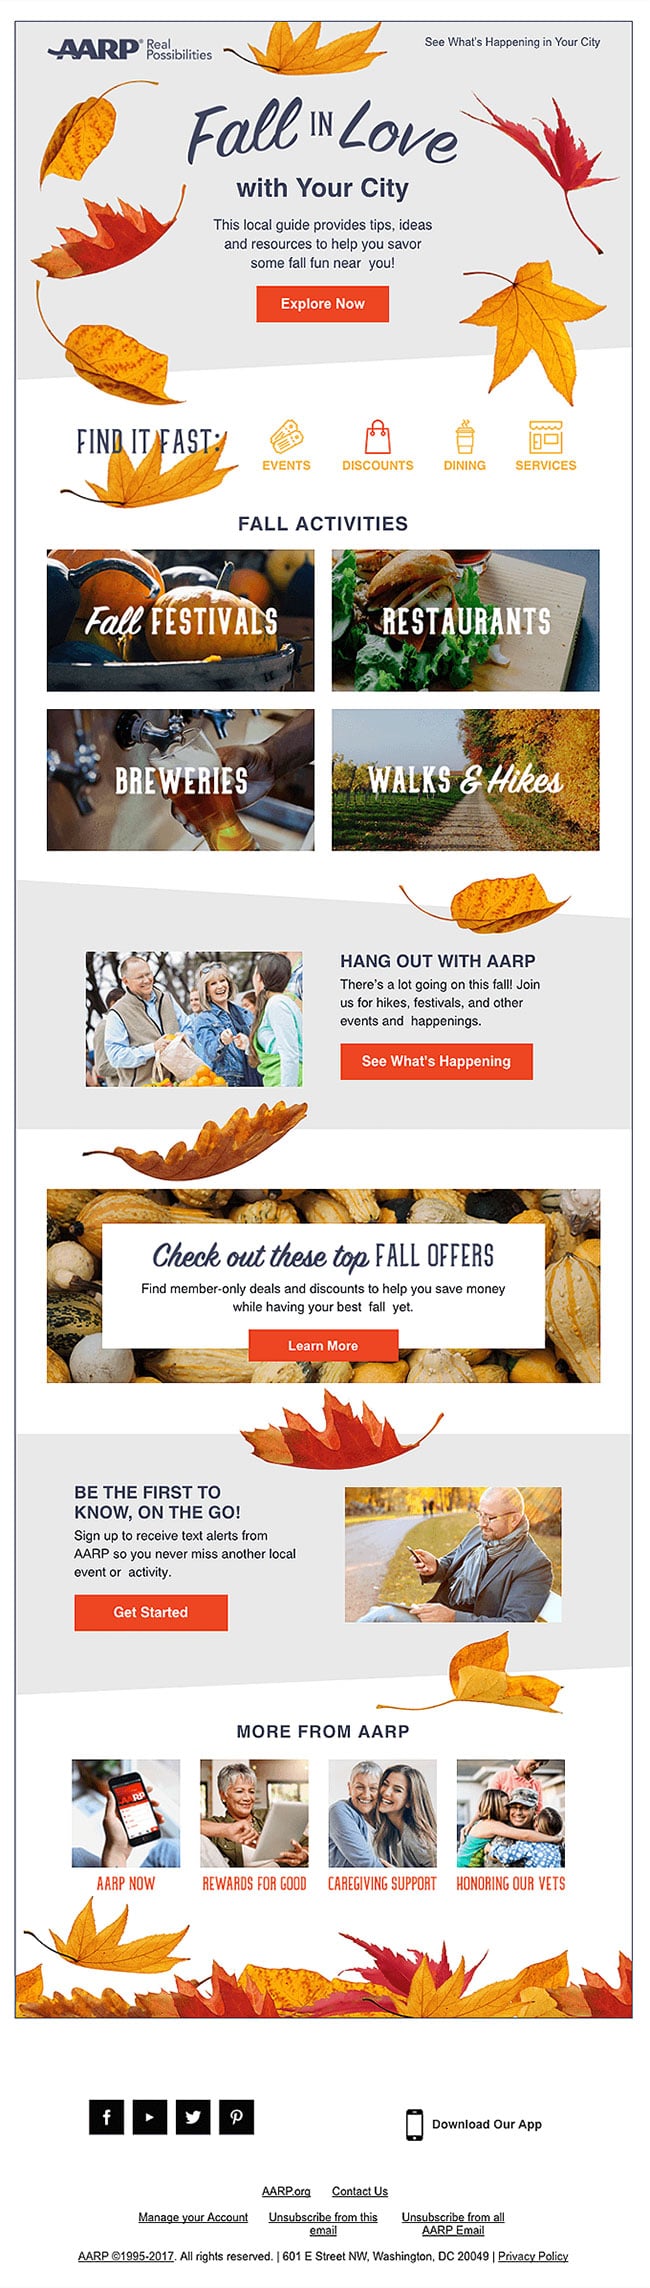 AARP gives personalization a splash of variety